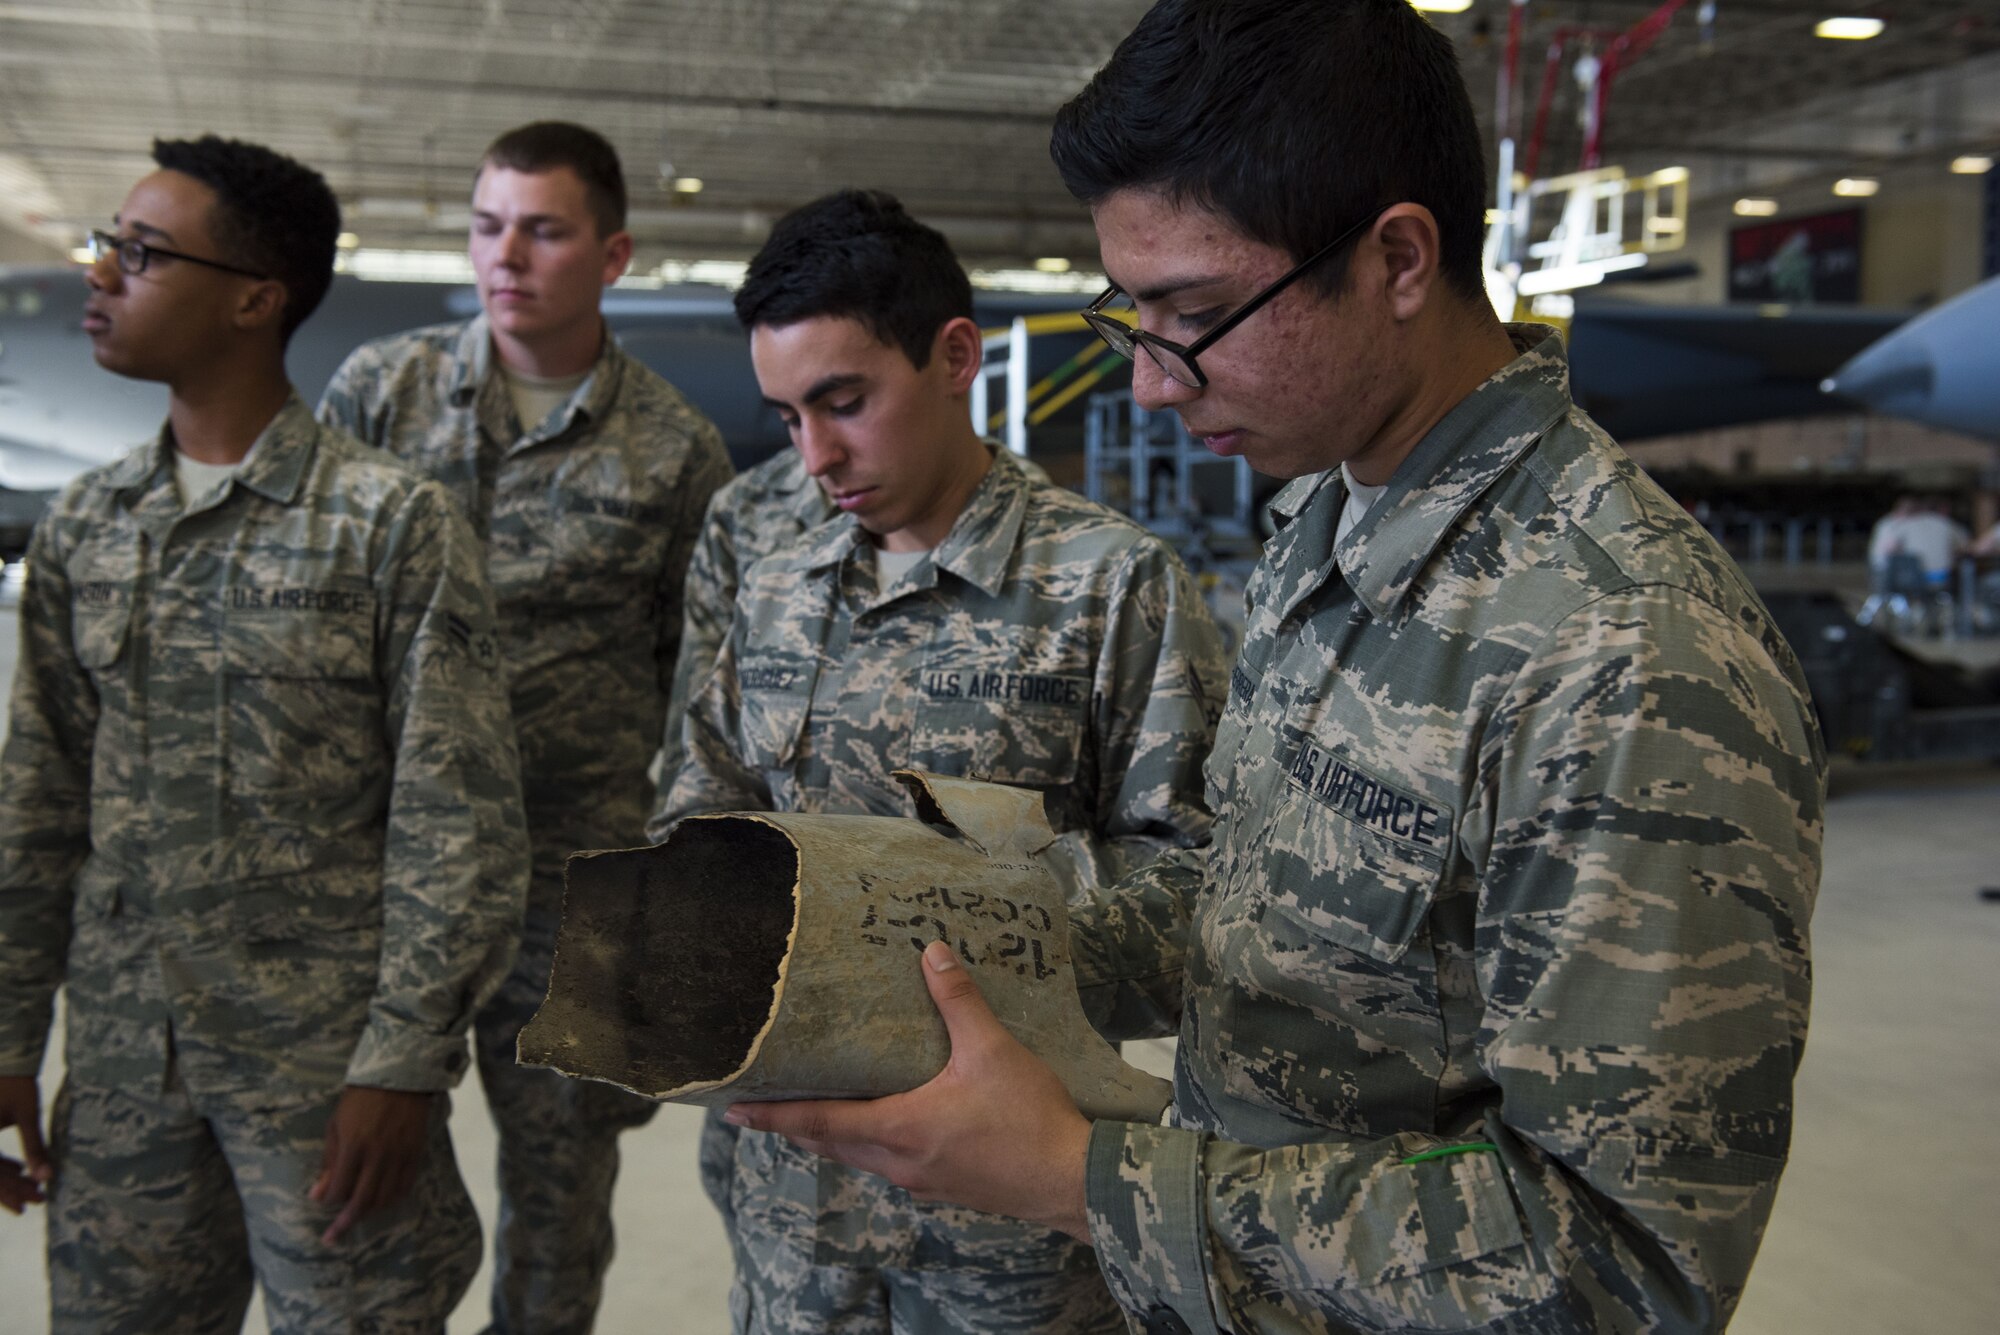 Airman holds a piece of shrapnel from an advanced medium-range air-to-air missile.